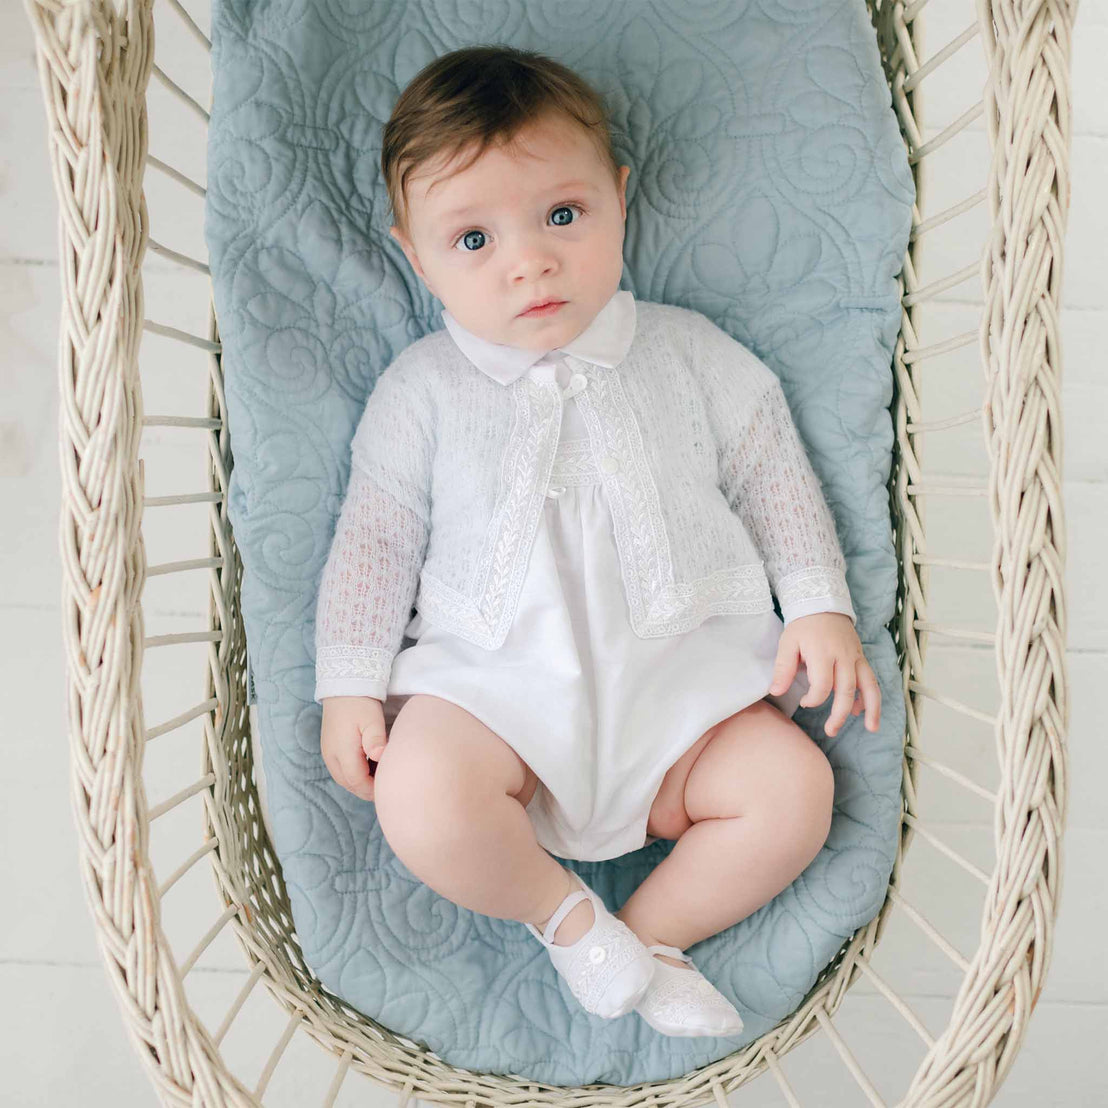 A baby with light brown hair wearing an Oliver Knit Sweater and light-colored shoes is lying in a wicker basket with a quilted blue cushion. The white outfit, adorned with delicate Venice lace trim, complements the baby's neutral expression as they gaze up.